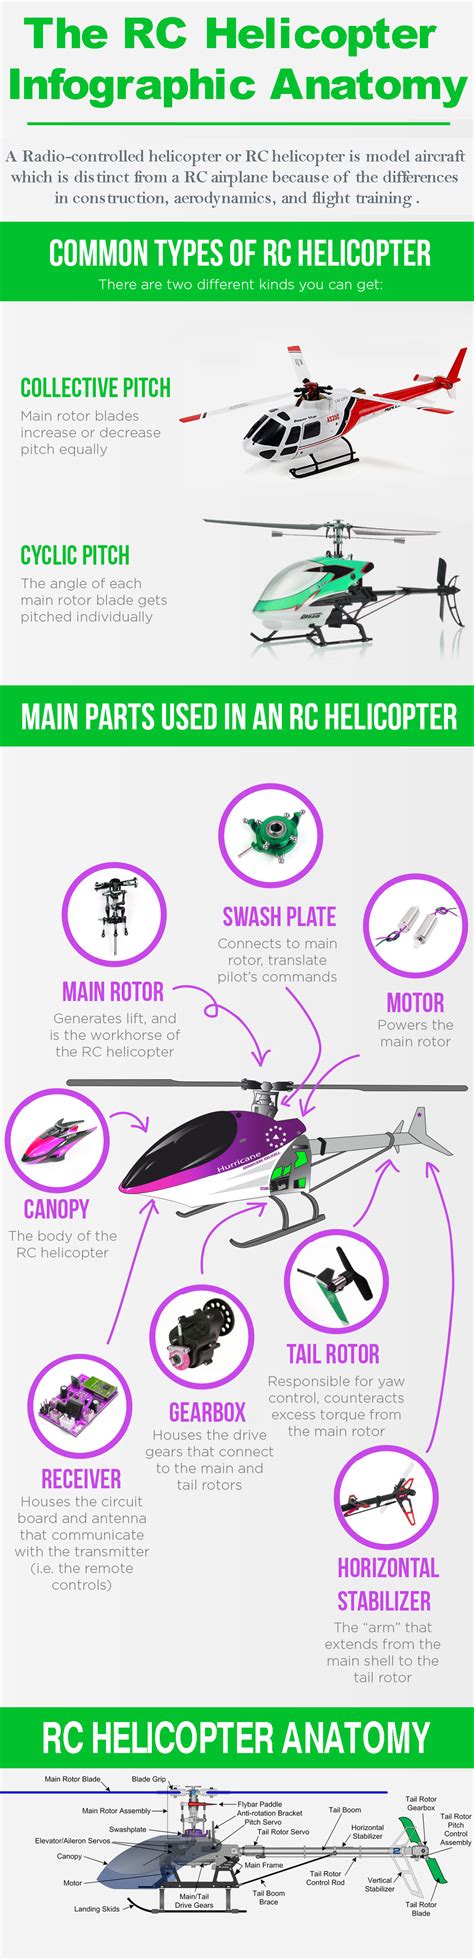 The Rc Helicopter Infographic Anatomy